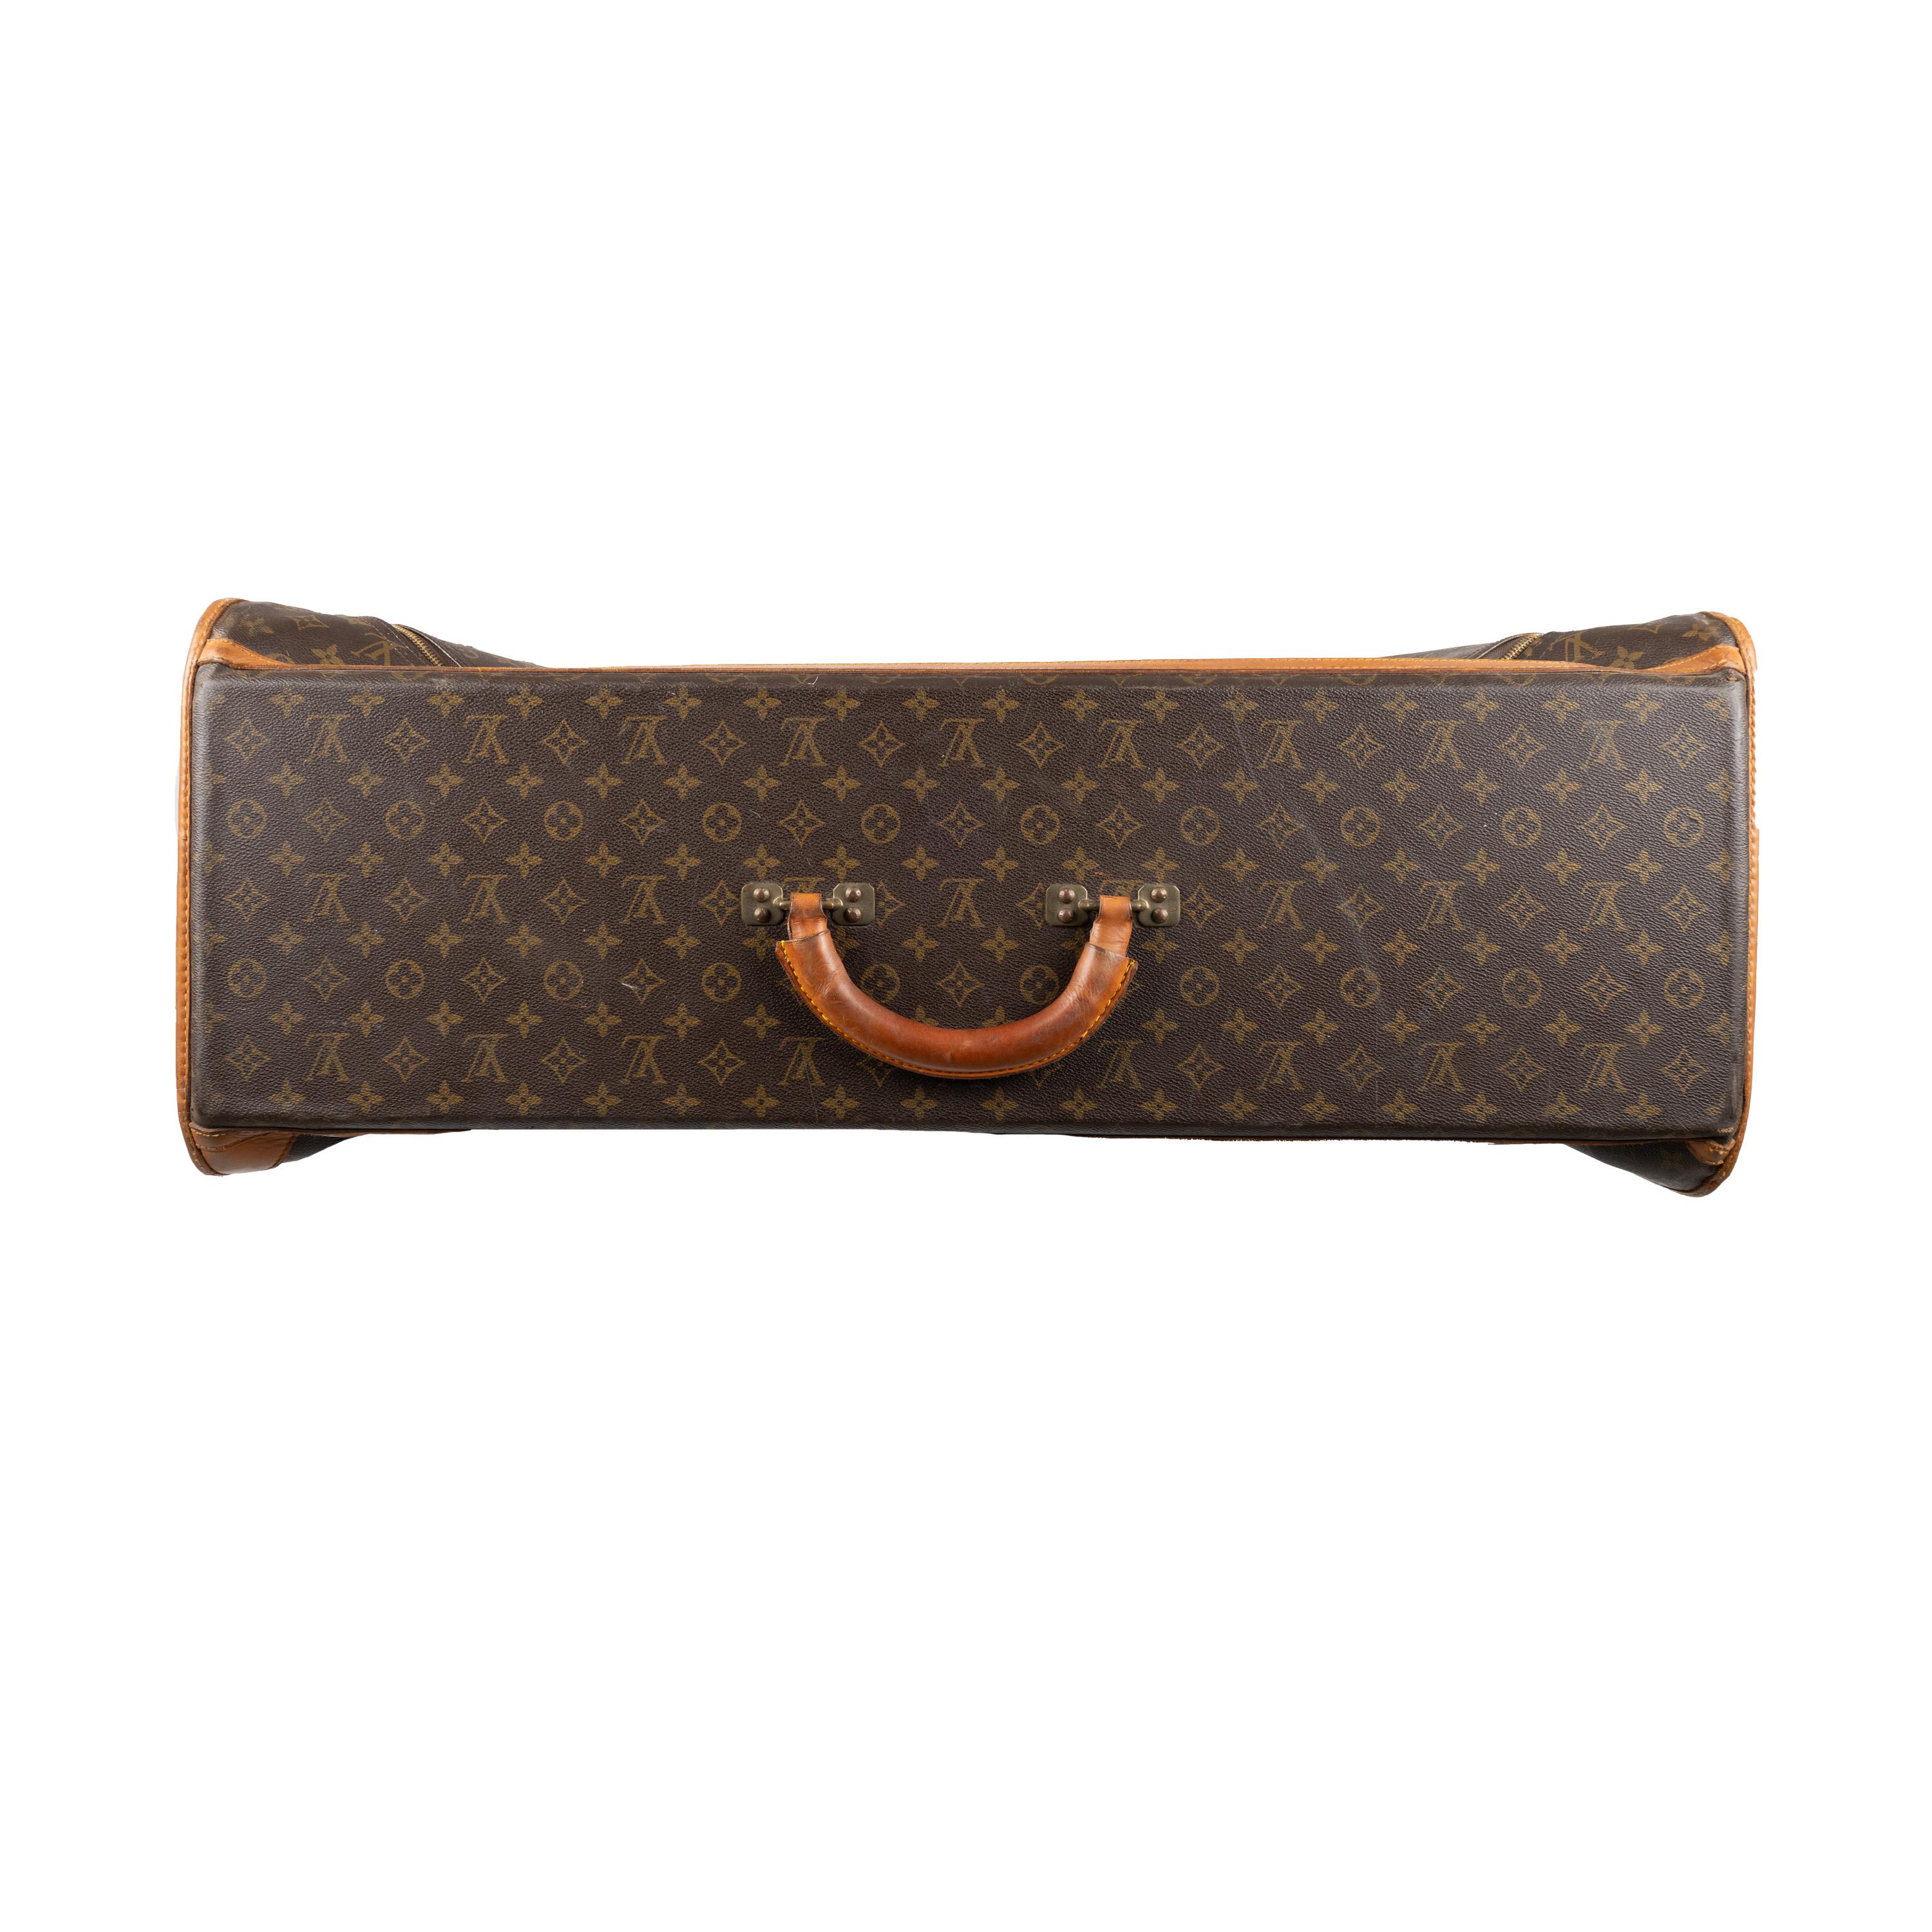 Louis Vuitton Monogram Pullman Travel Bag - '80s In Fair Condition For Sale In Milano, IT